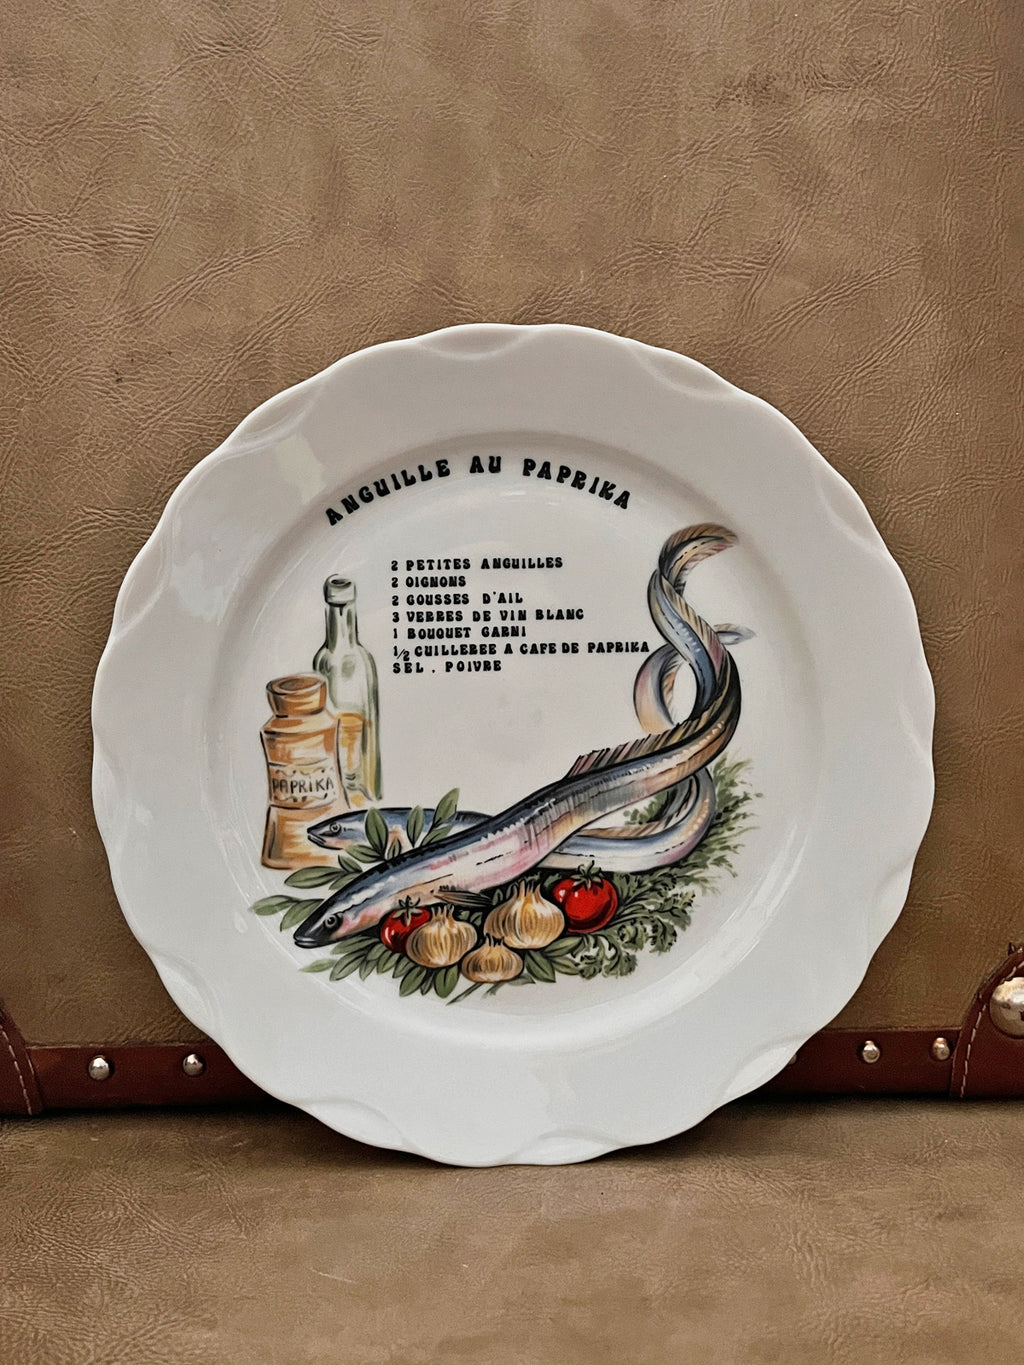 Vintage Fish Recipe Themed Plate by L'Hirondelle - Anguille (eel)